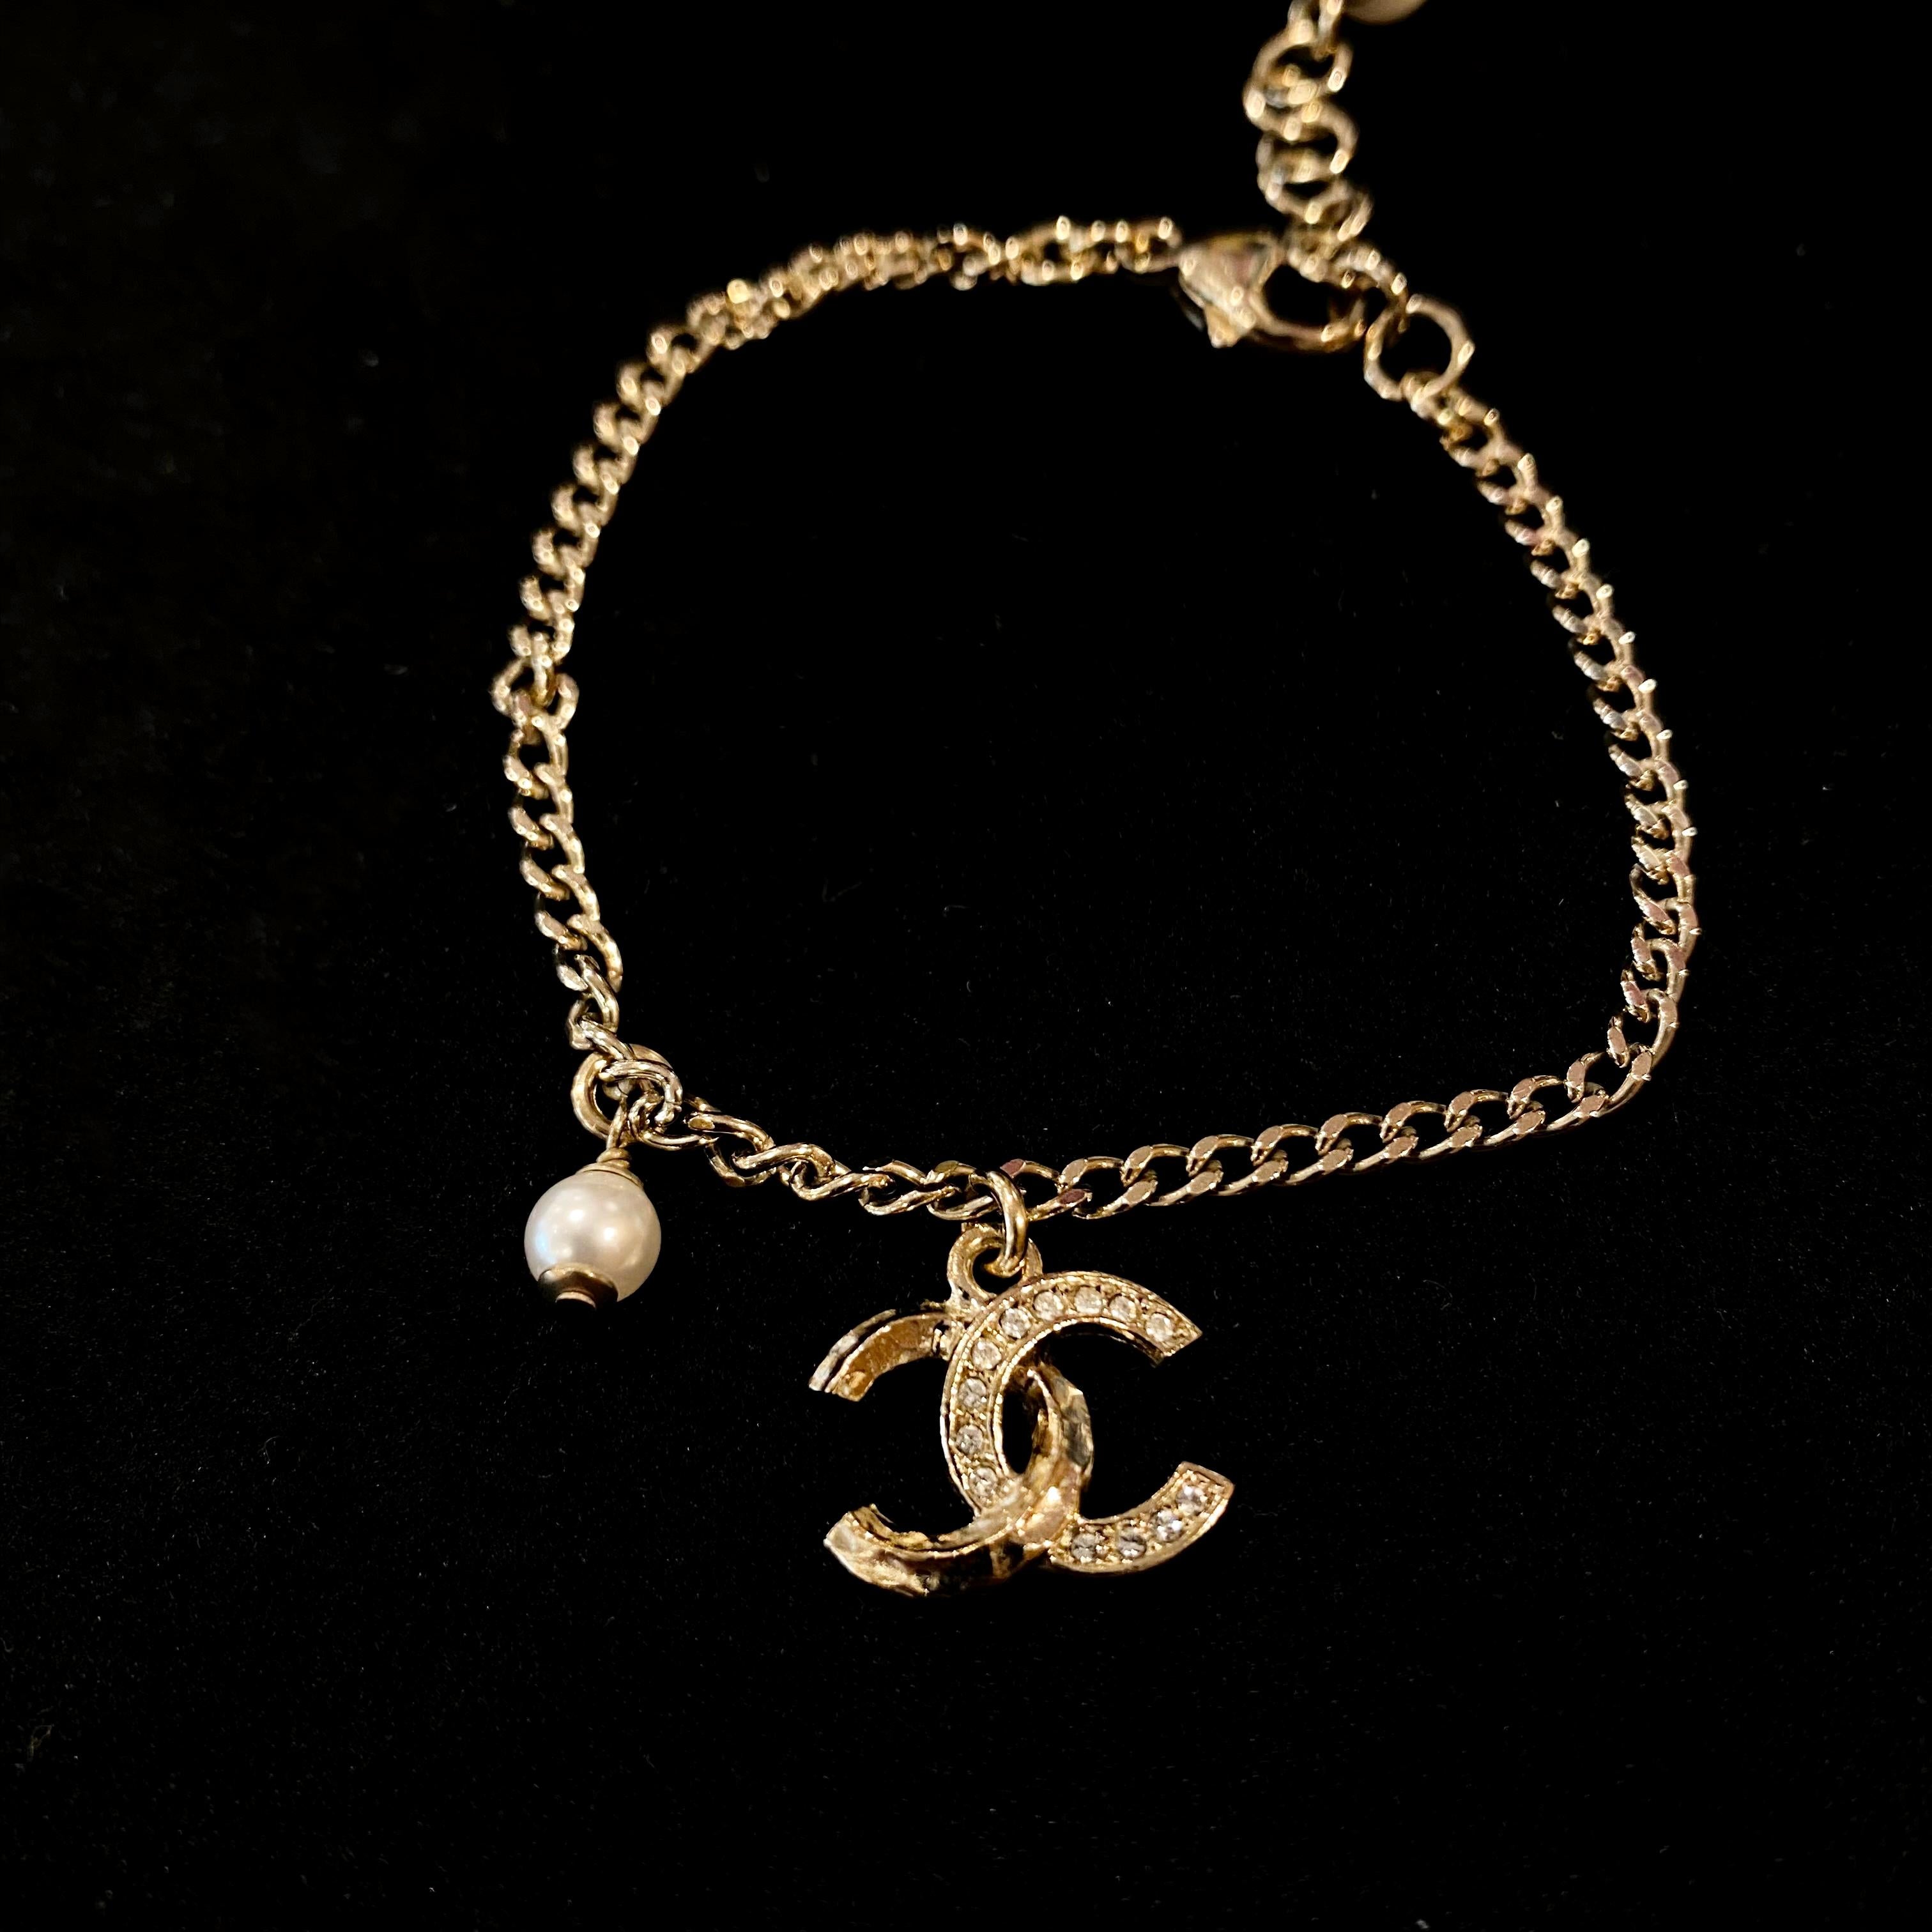 Brand: Chanel
Reference: OT1692
Measurement of Bracelet: Total Length is 16cm + Adjustable length of 3.5cm
Material: Gilt Metal
Year: 2021
Made in France

Please Note: the jewelries are guarantee 100% authentic pre-owned therefore might have signs